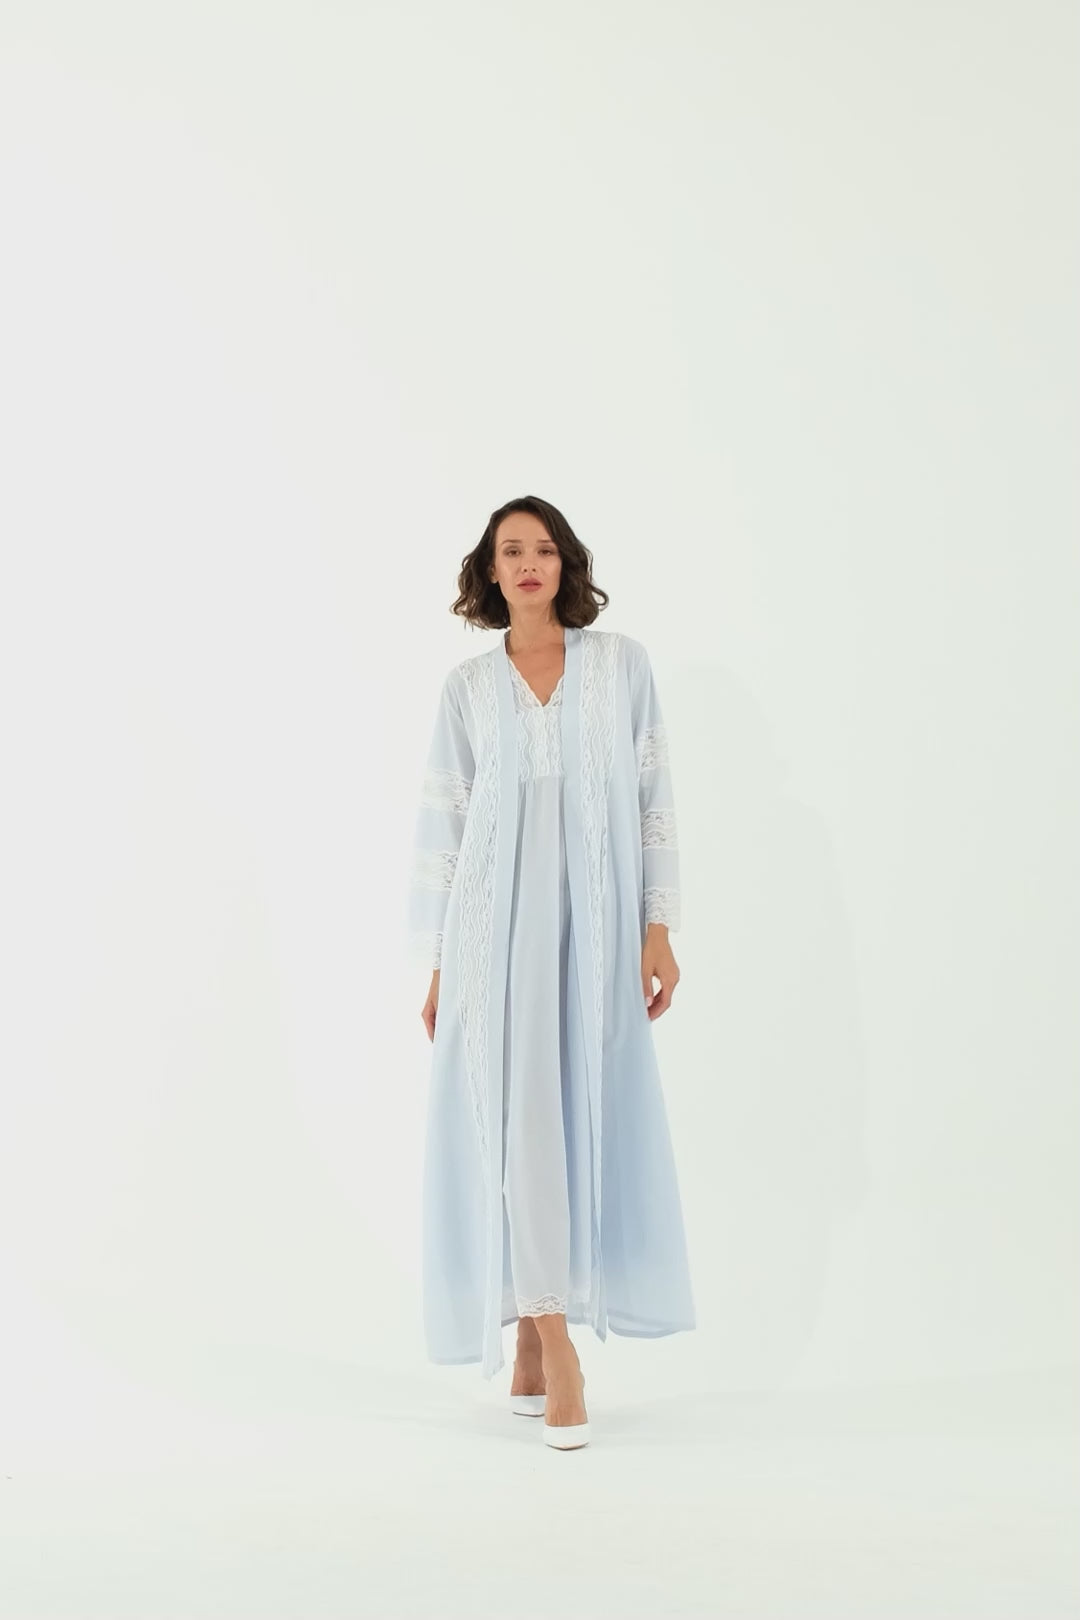 Asterid Trimmed Cotton Voile Long Sleeve Robe Set - Baby Blue